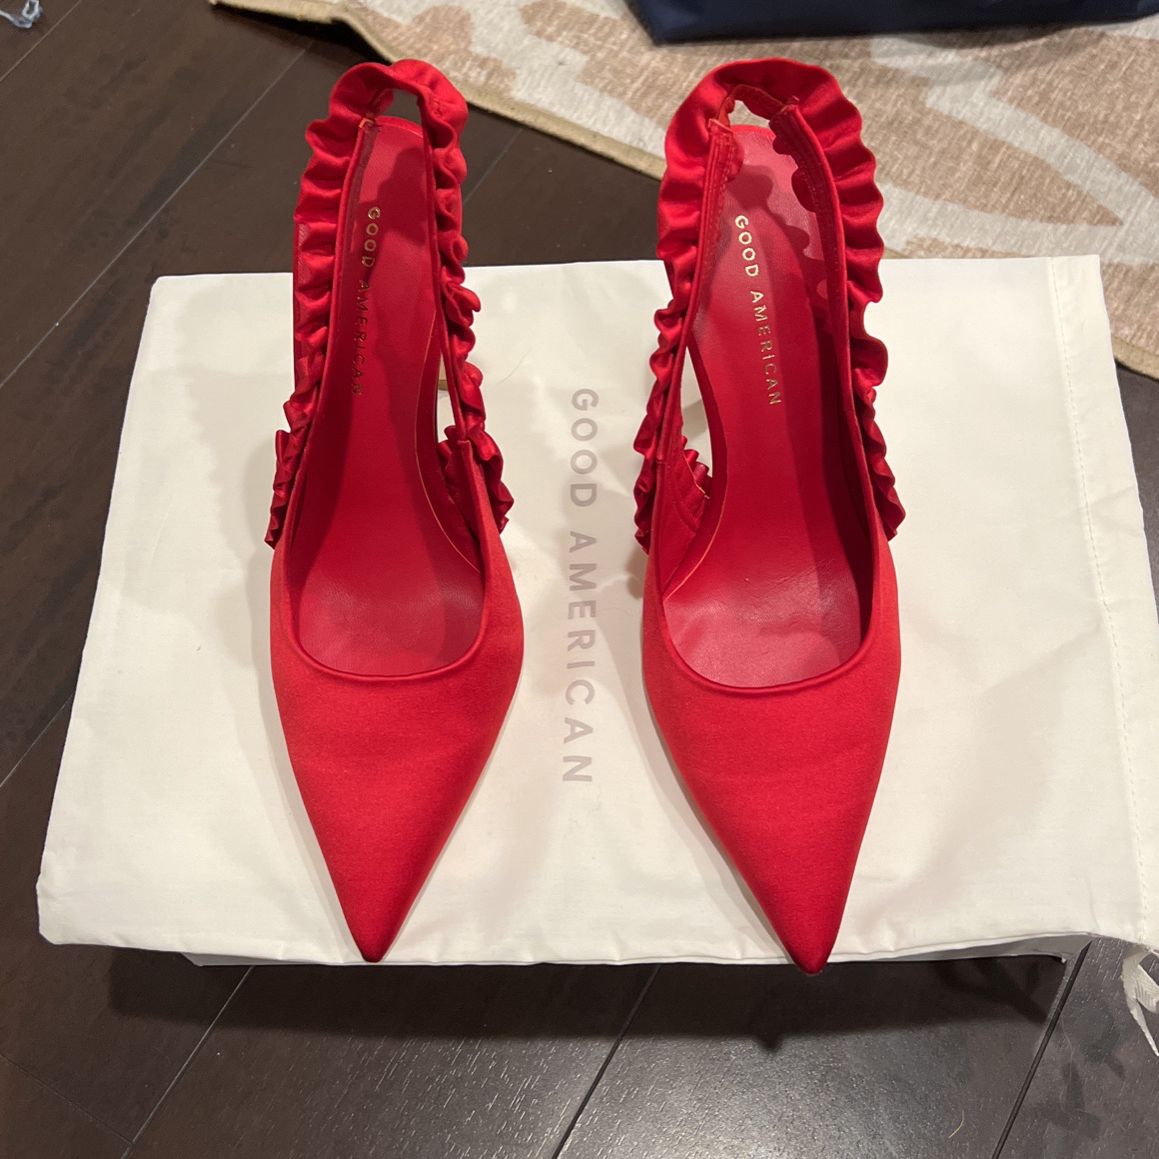 Good America Red Satin Pumps Size 9